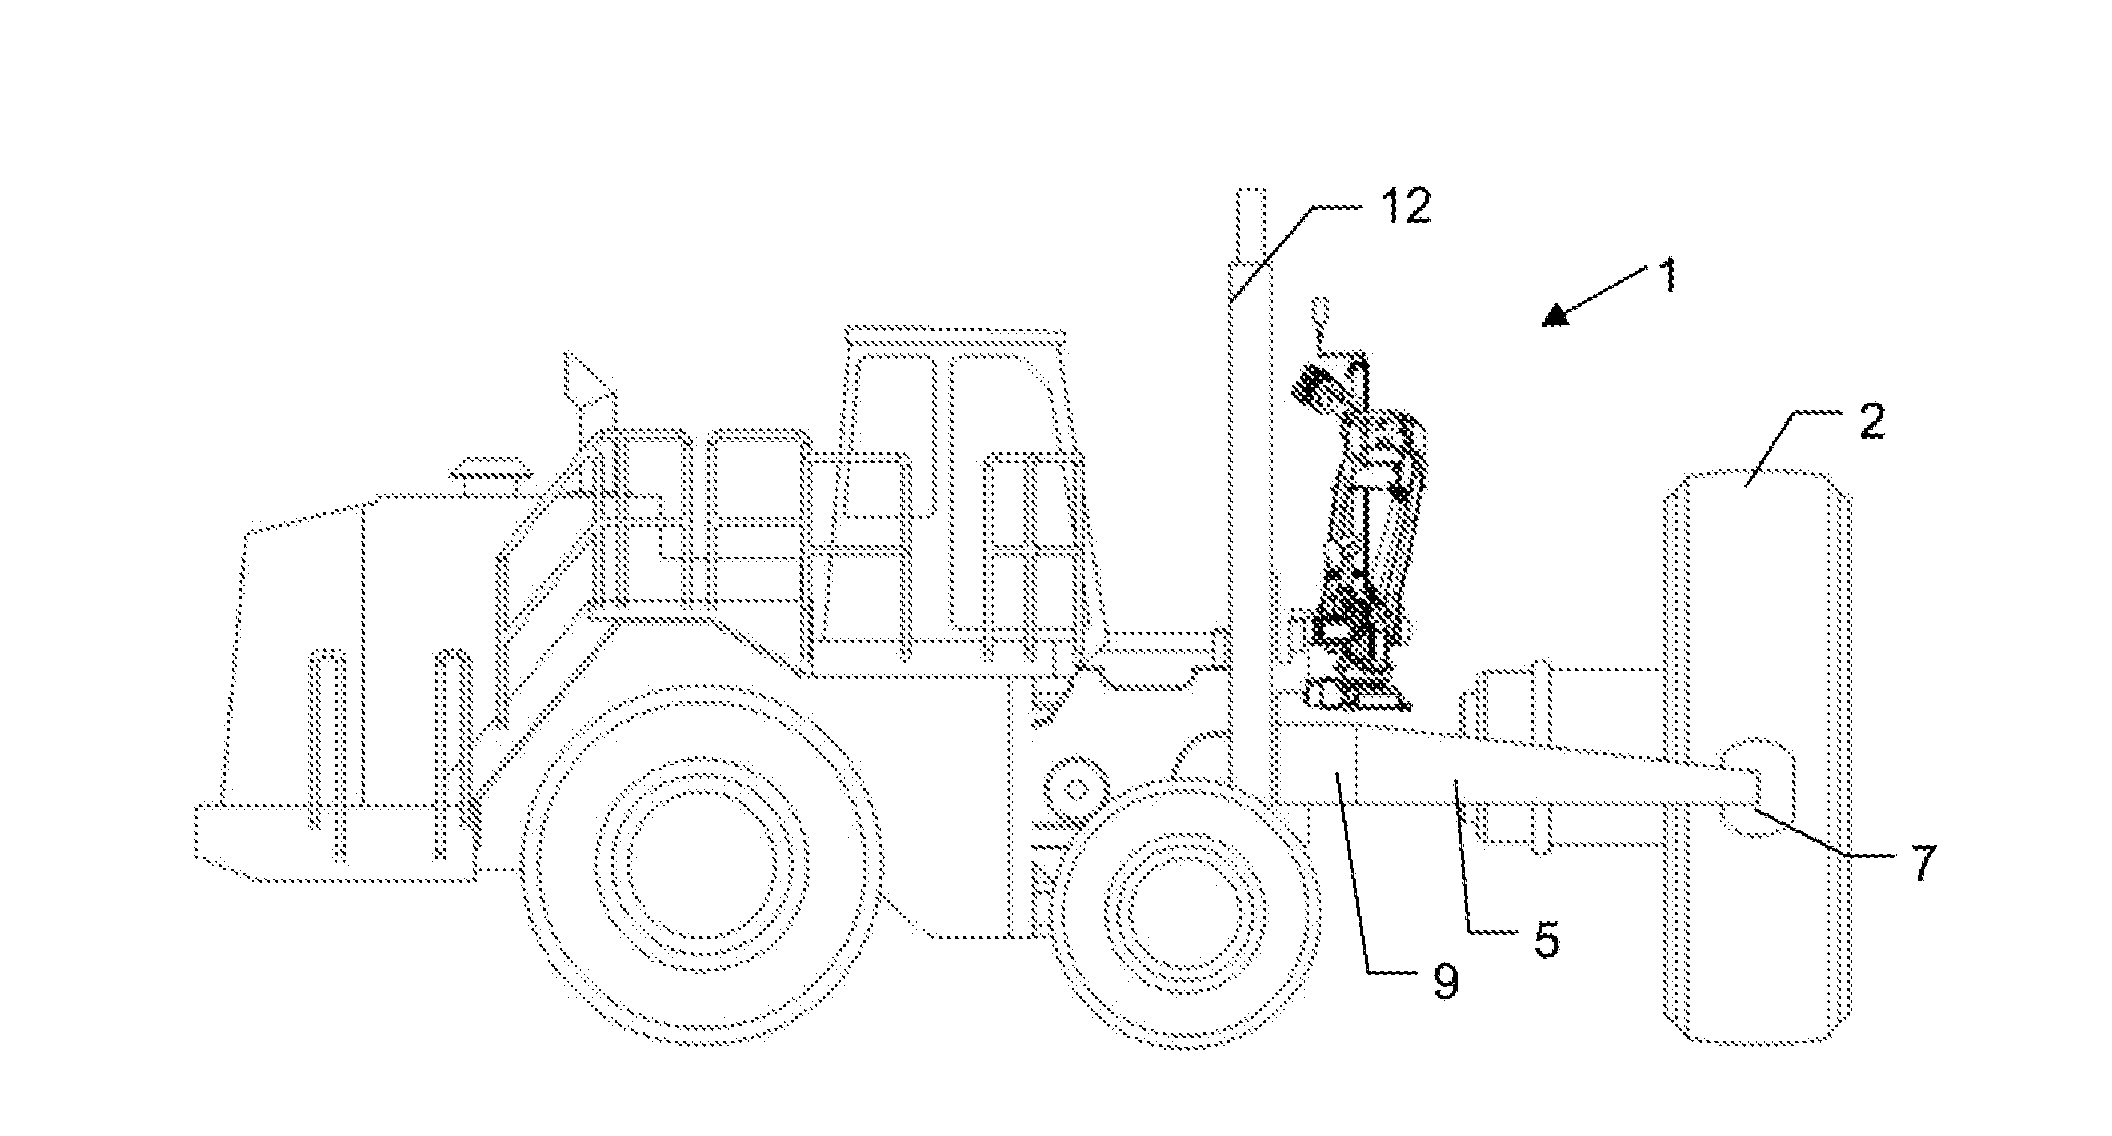 Robotic tyre changing apparatus and associated hardware and methods